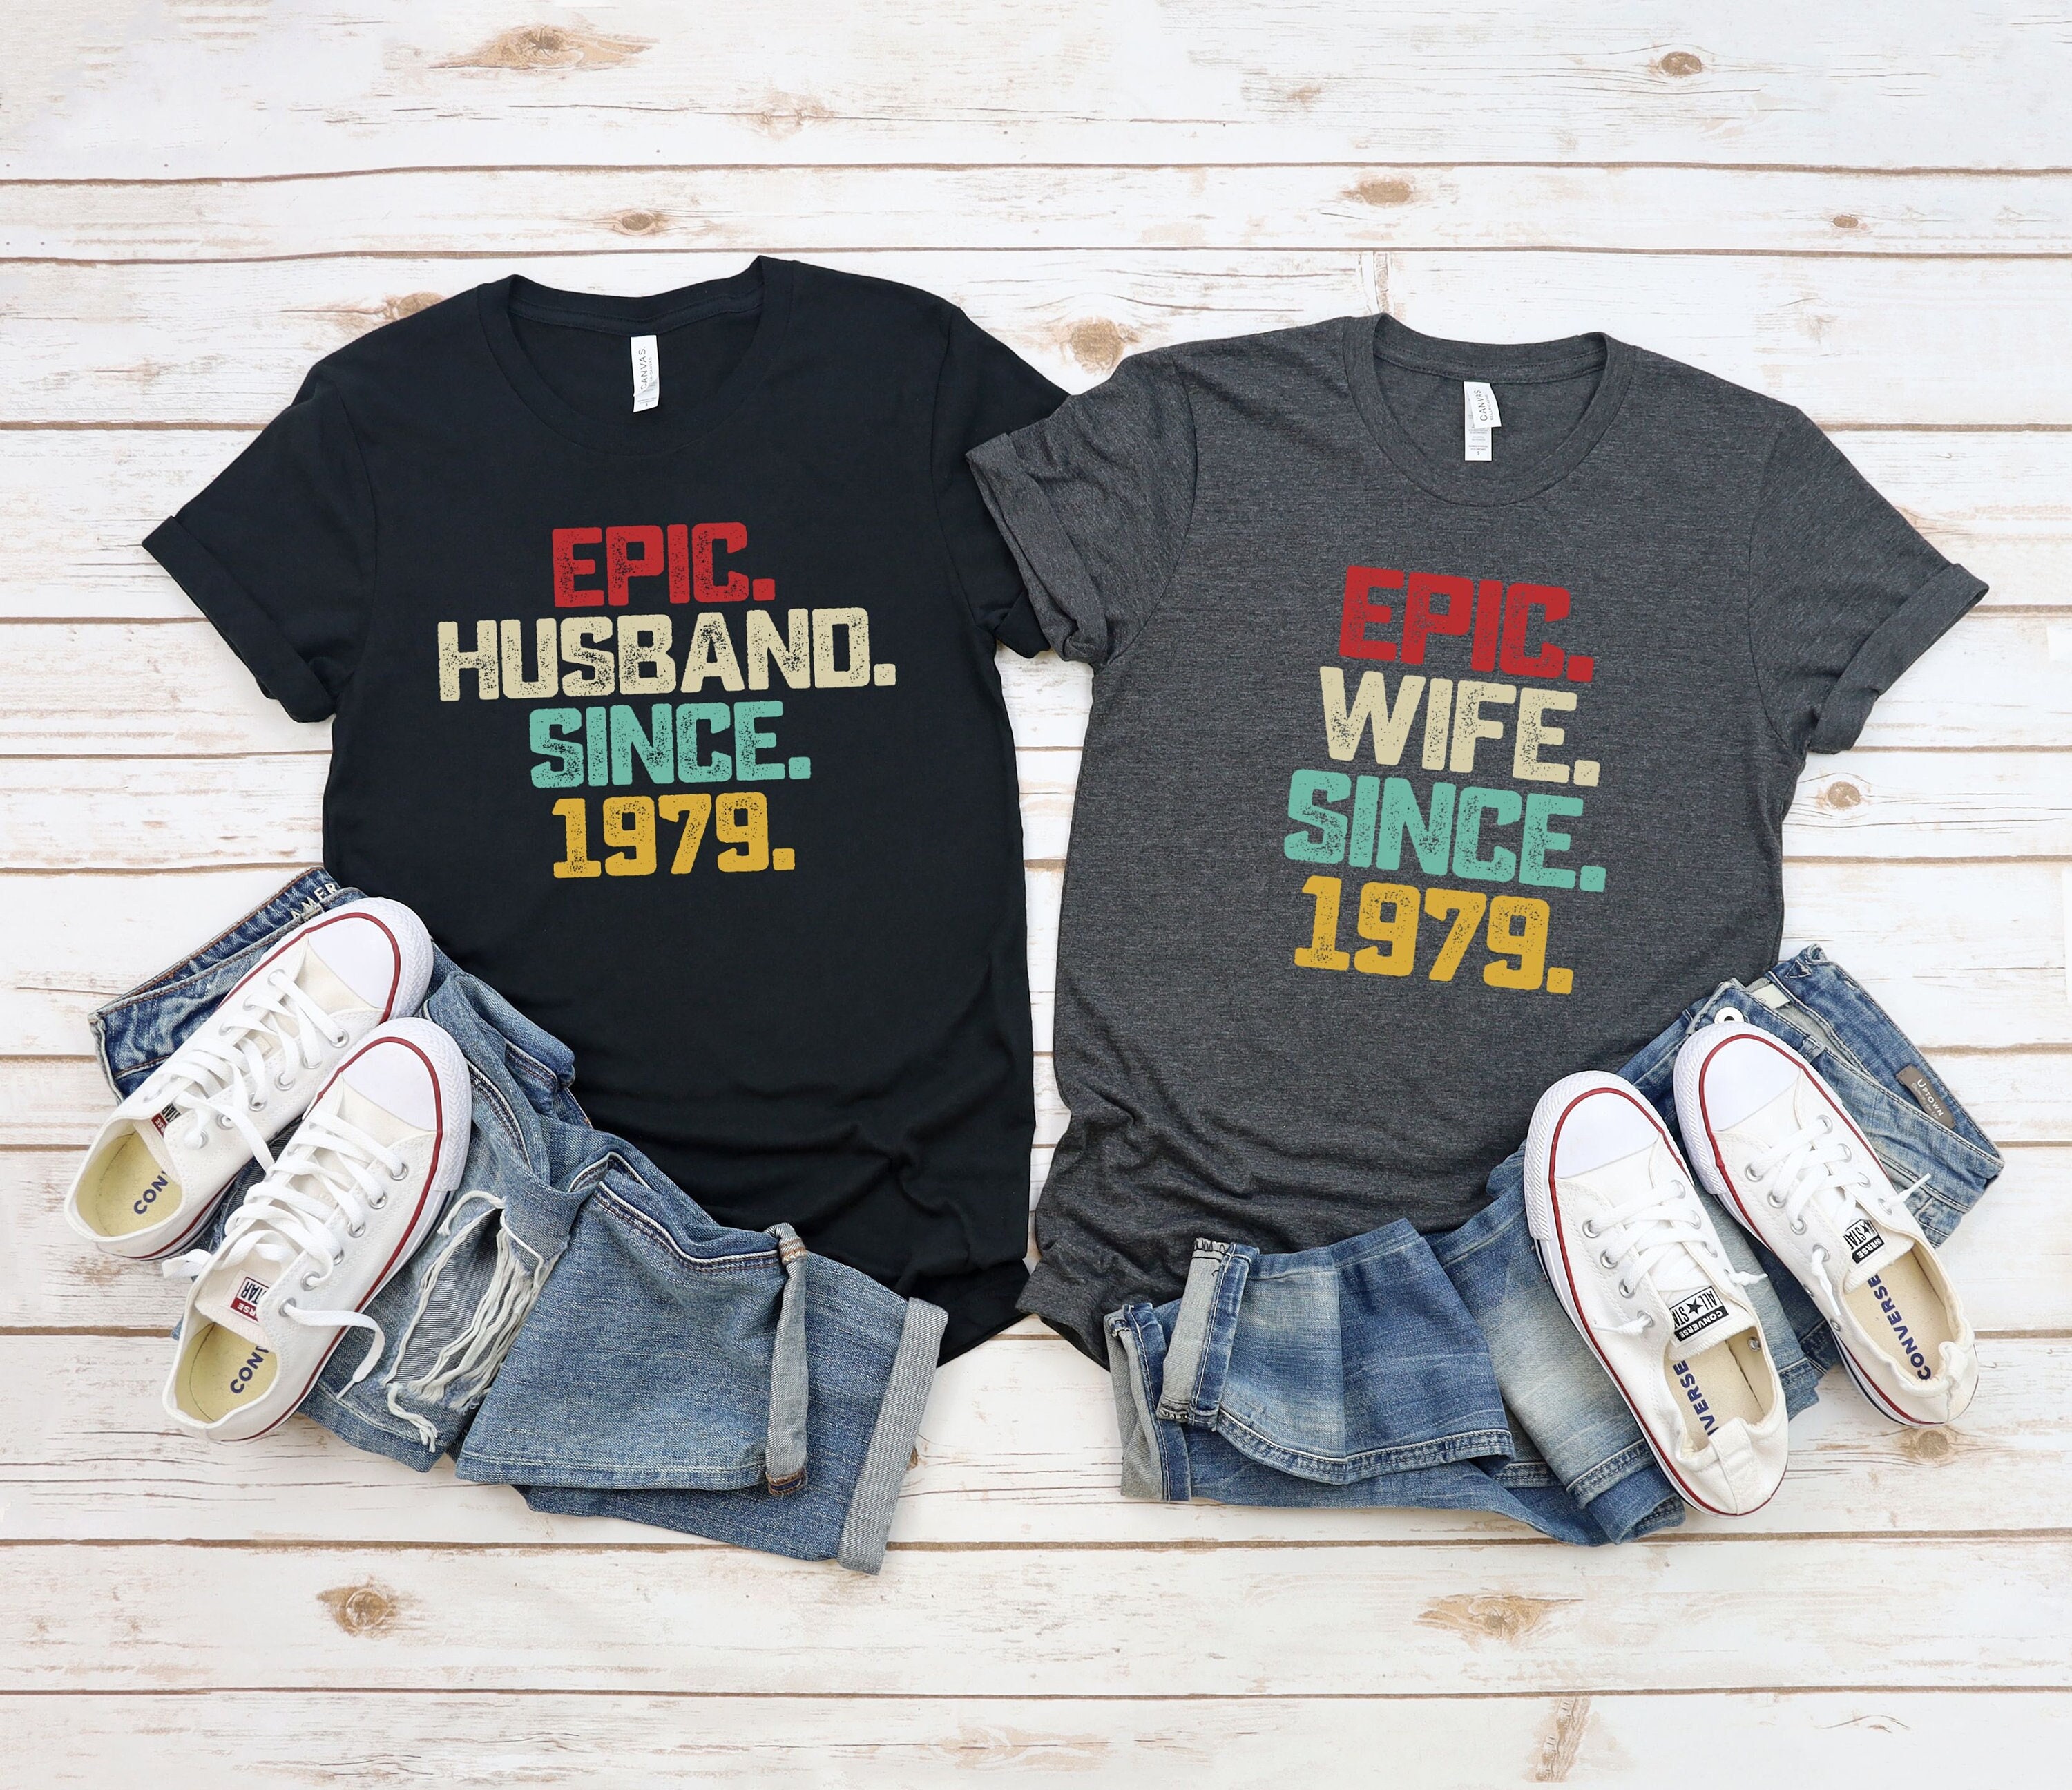 45th Wedding Anniversary gifts for him her couple' Men's T-Shirt